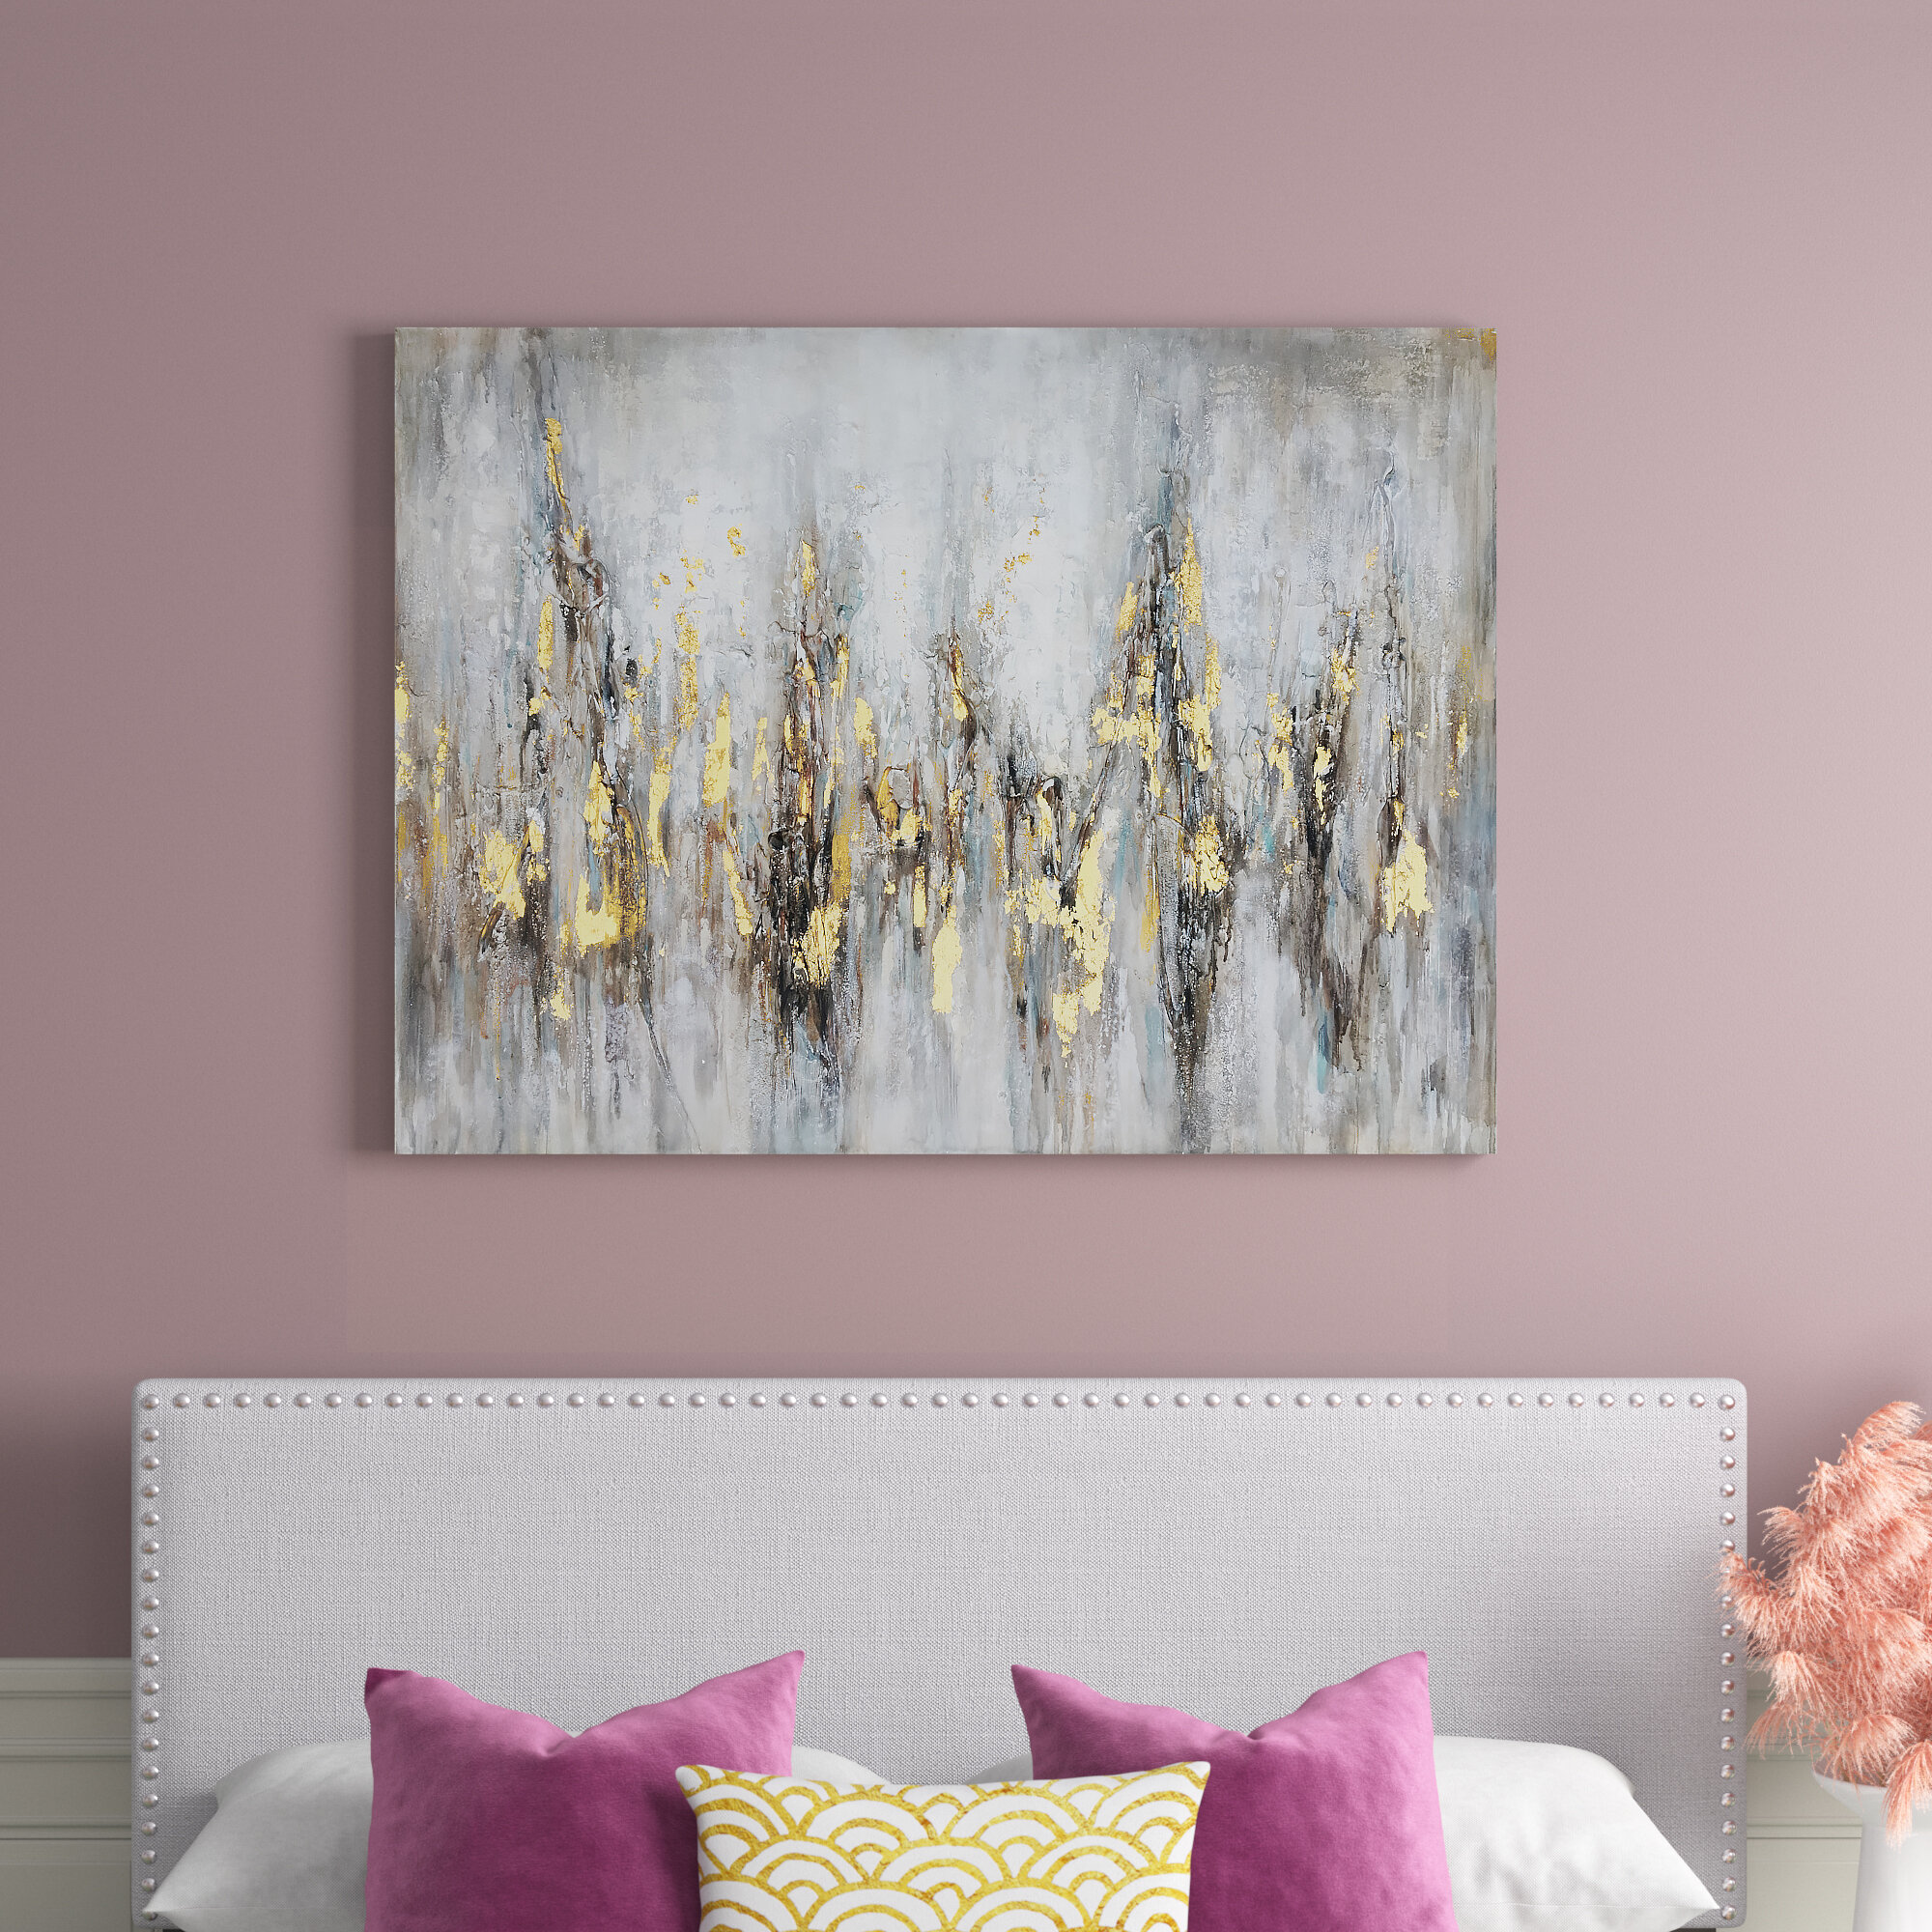 Wayfair Pencil/Charcoal Drawings Canvas Art You'll Love in 2023